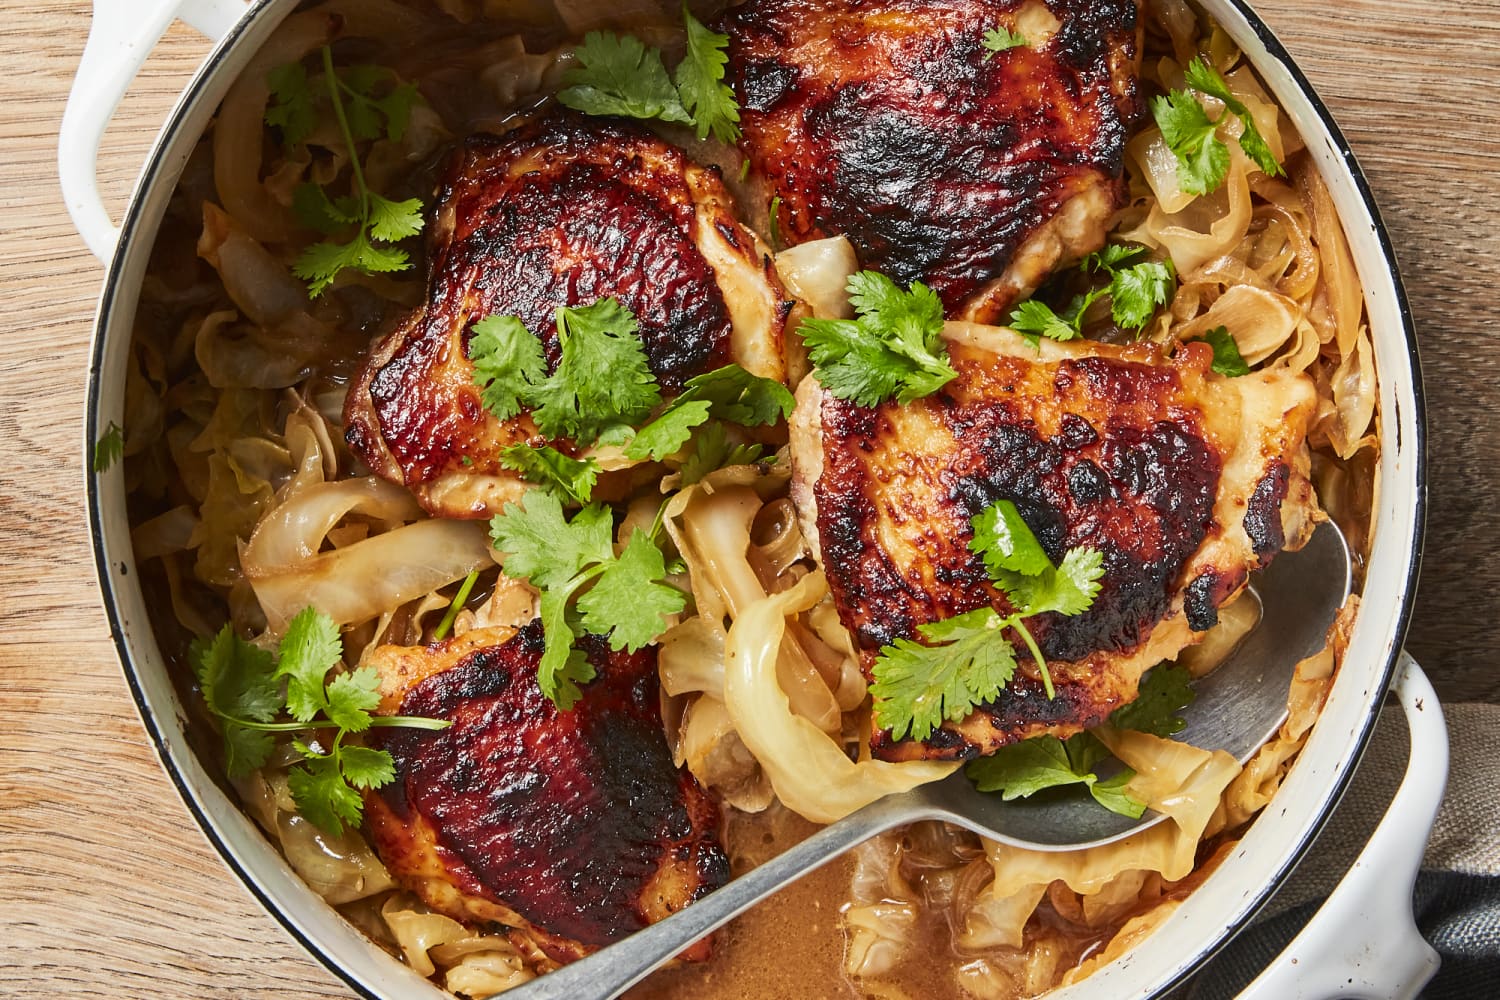 https://cdn.apartmenttherapy.info/image/upload/f_auto,q_auto:eco,c_fill,g_auto,w_1500,ar_3:2/k%2FPhoto%2FRecipes%2F2022-10-one-pan-miso-butter-chicken-and-cabbage%2Fone-pan-miso-butter-chicken-and-cabbage-0188